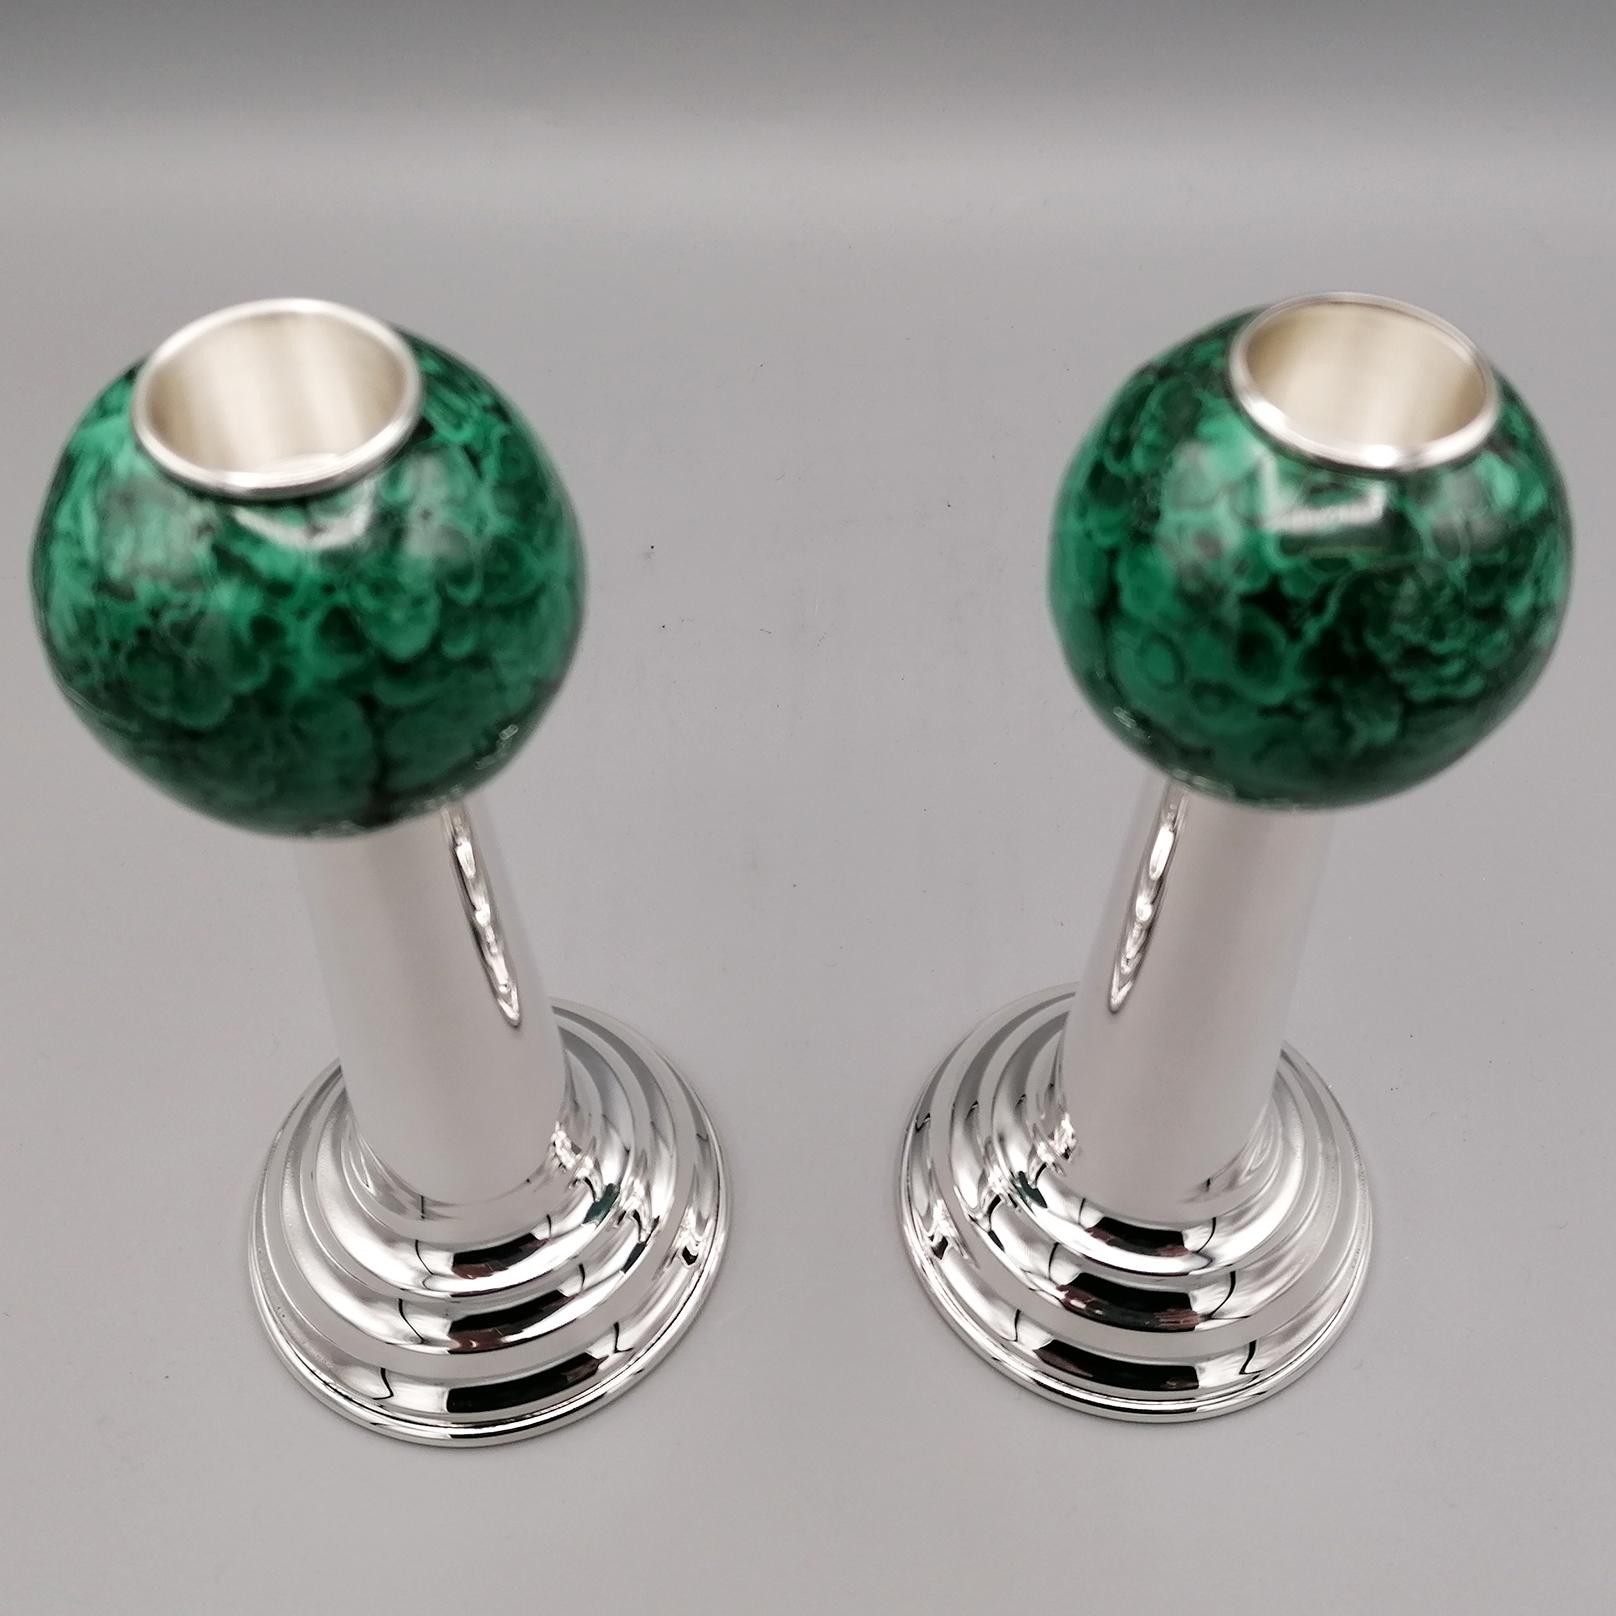 Hand-Crafted 20th Century Italian Pr. of Sterling Silver and Malchite Candlesticks